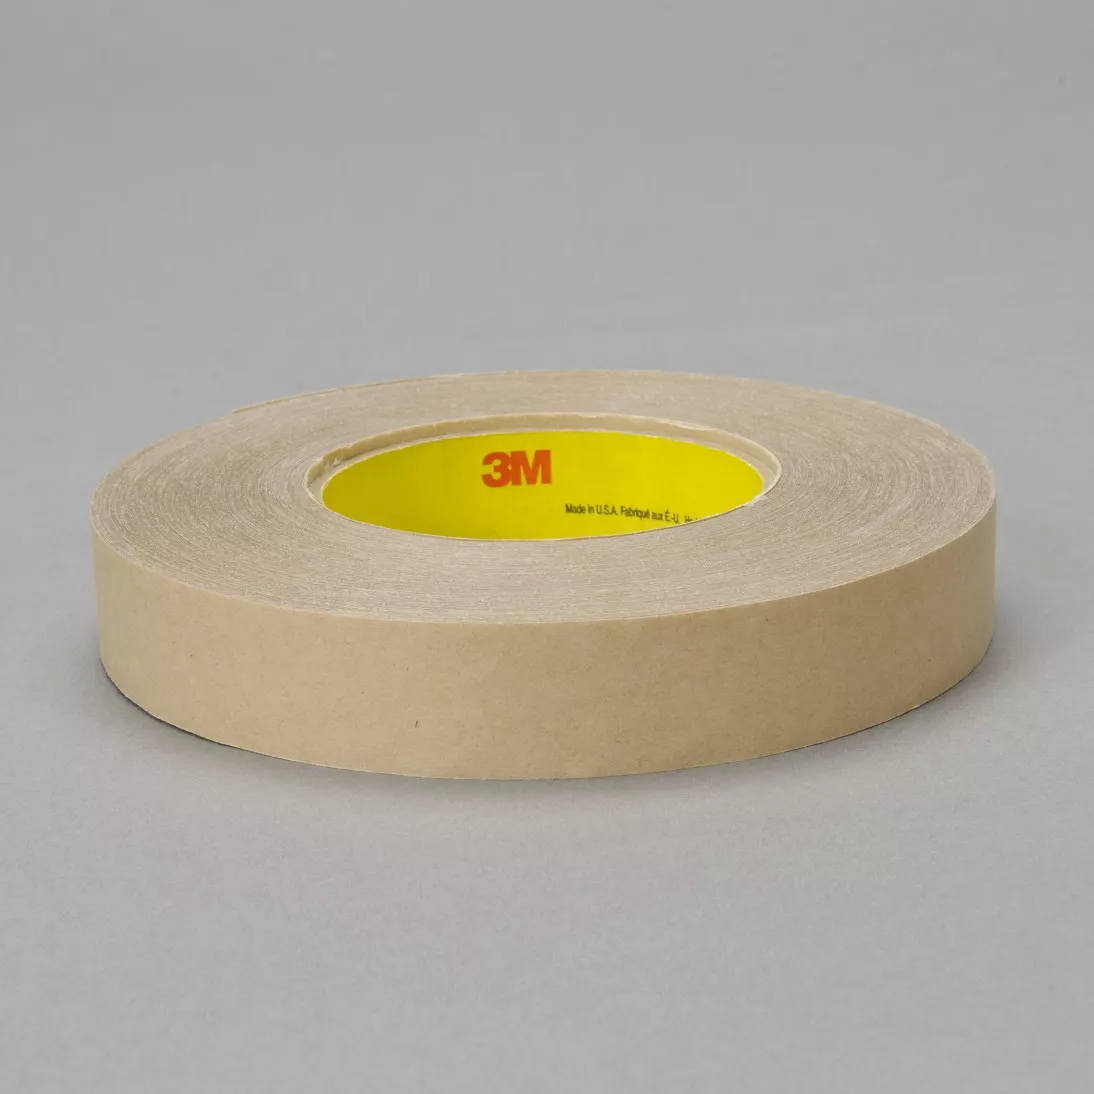 3M™ Adhesive Transfer Tape 9485PC, Clear, 1 1/2 in x 60 yd, 5 mil, 24
rolls per case